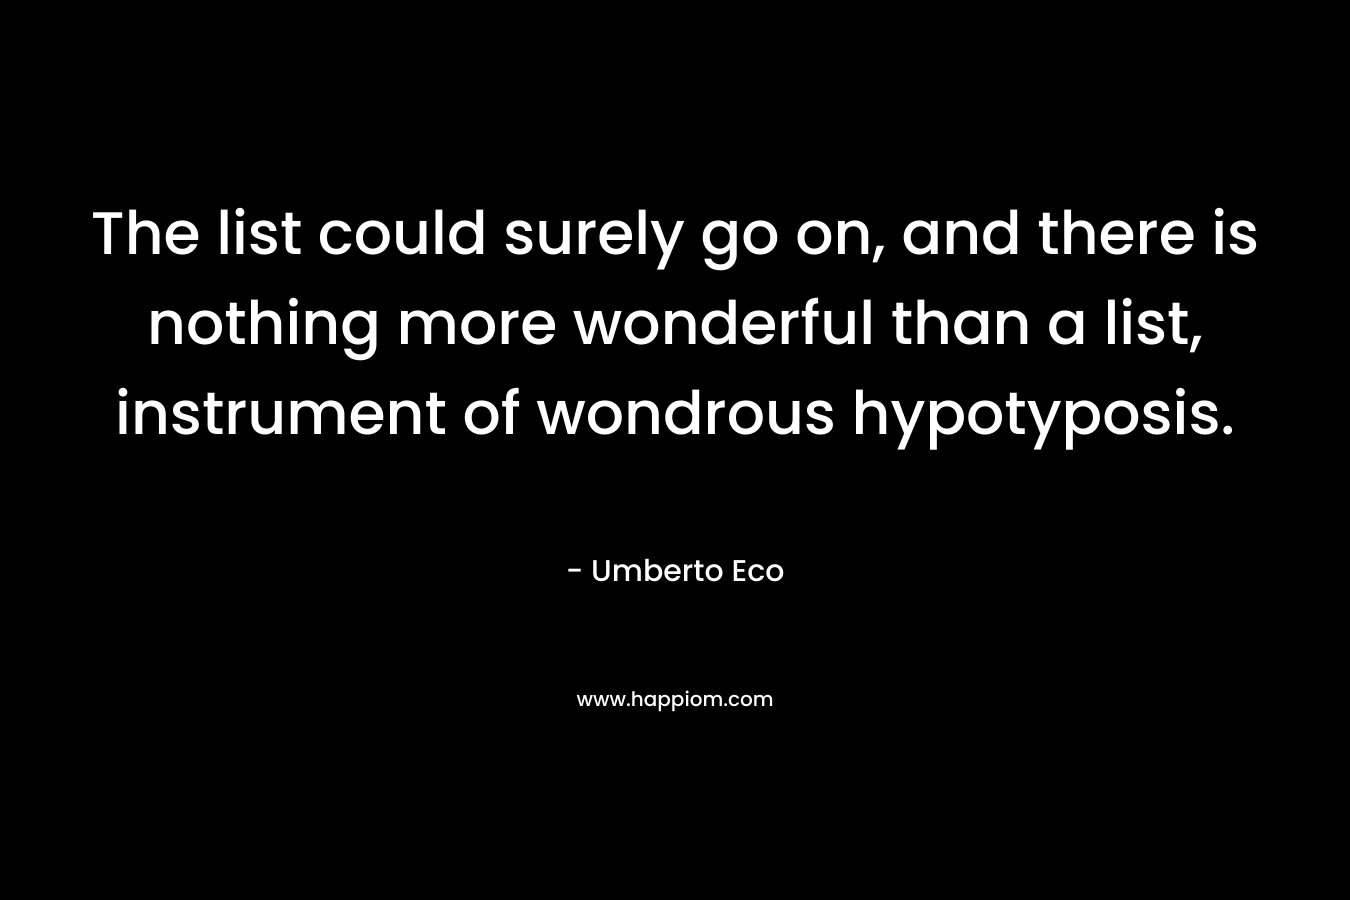 The list could surely go on, and there is nothing more wonderful than a list, instrument of wondrous hypotyposis.